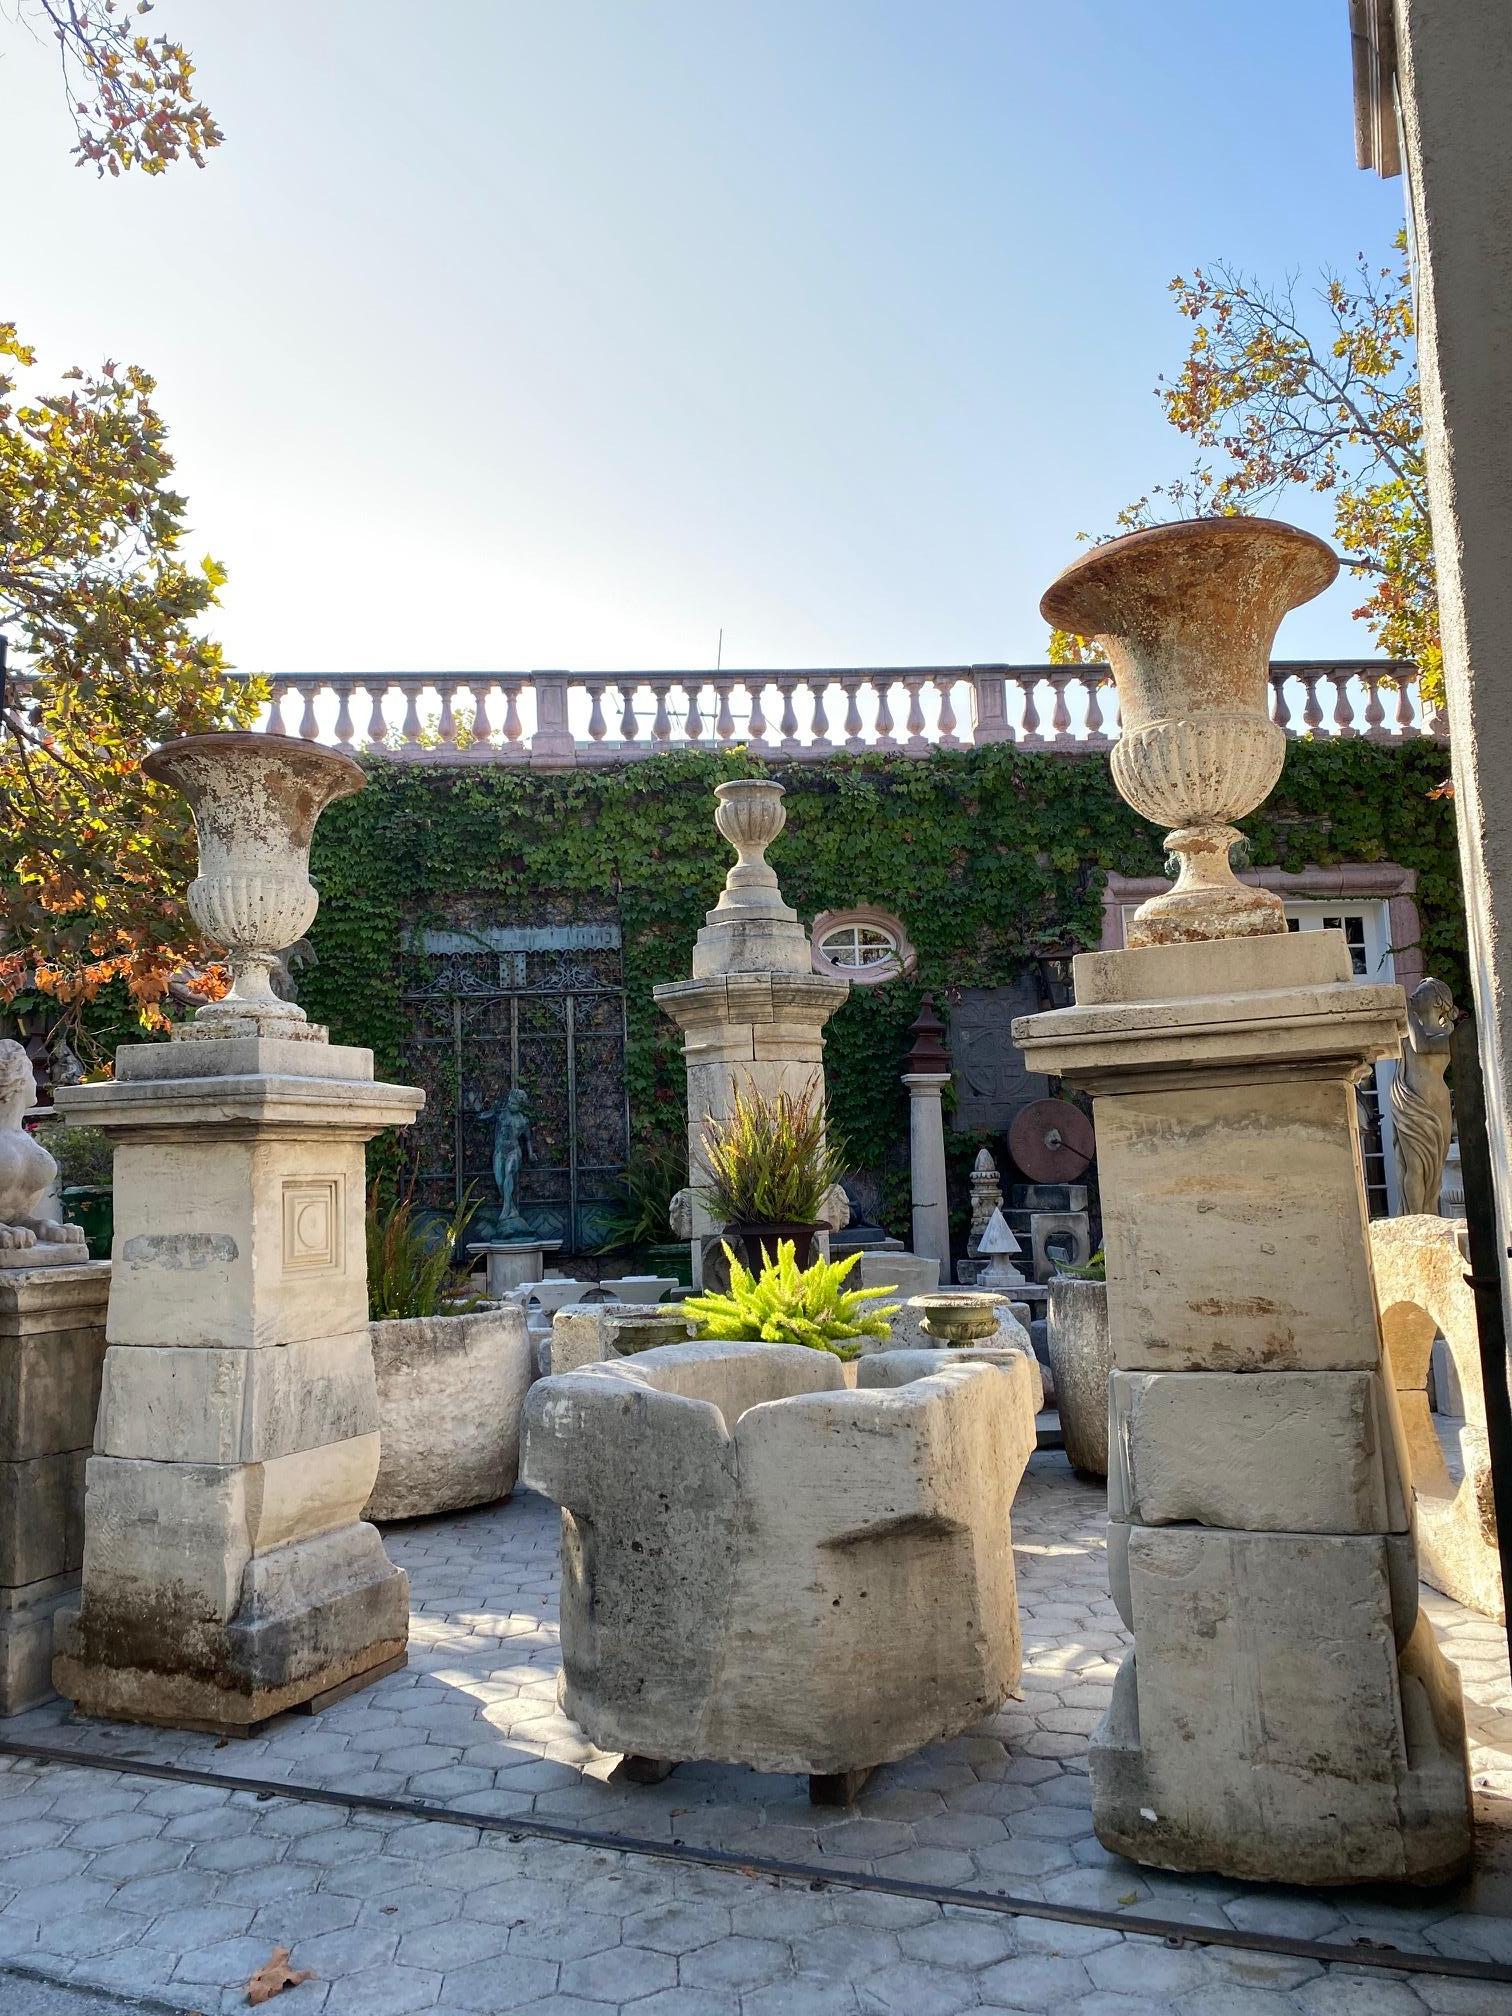 Rare pair of 18th-19th century nicely hand carved stone entry pillars entryway columns sitting on base square pedestals with very. Could be used as a single column to be placed in a garden as an architectural decorative element, focal point topped